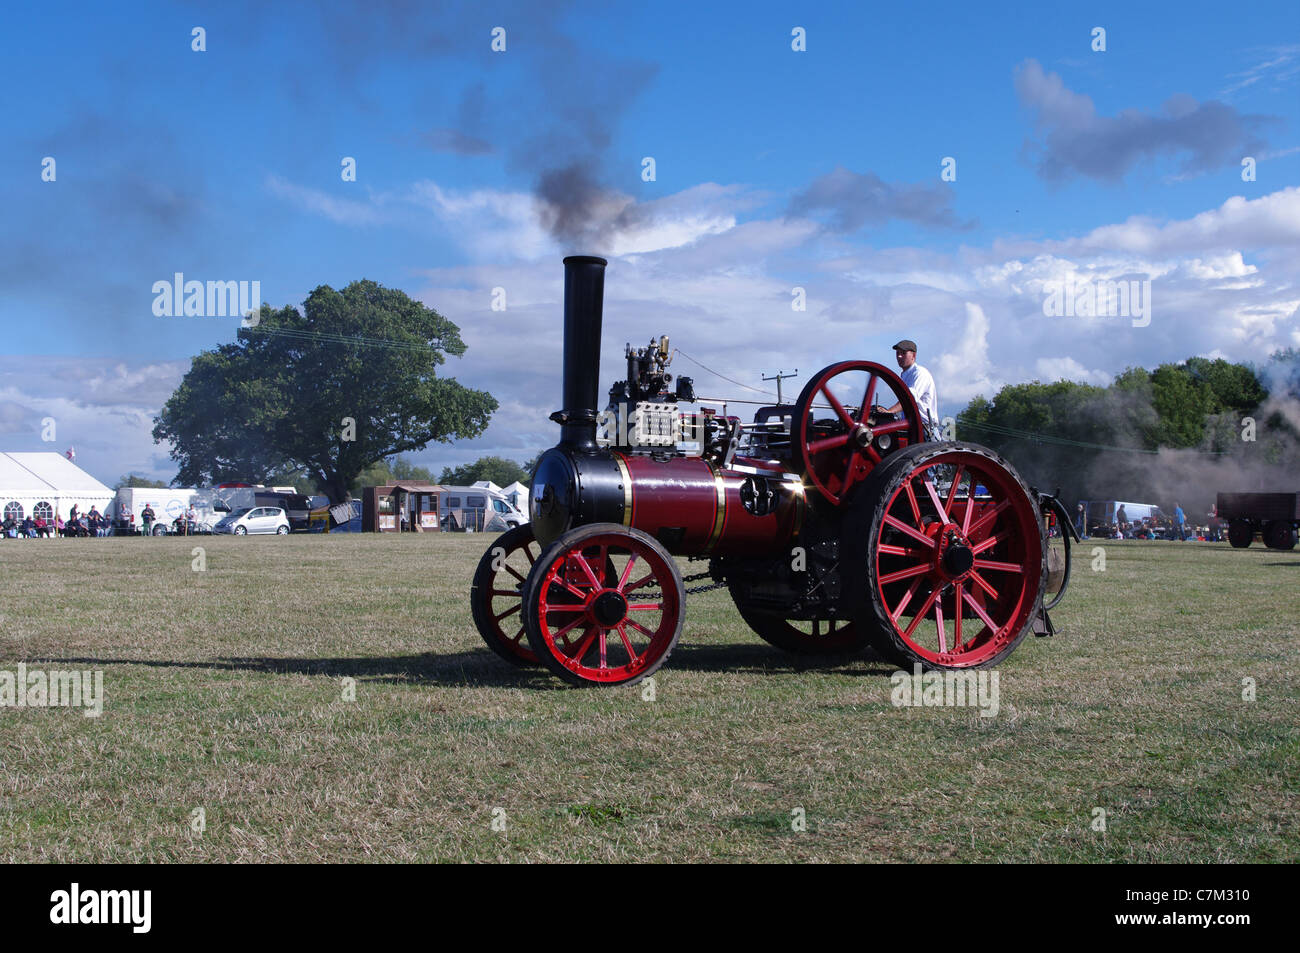 Garrett 1902 agricultural traction engine Lucy in steam at Stoke Prior Rally, left side. Sunny day, blue sky, white clouds Stock Photo